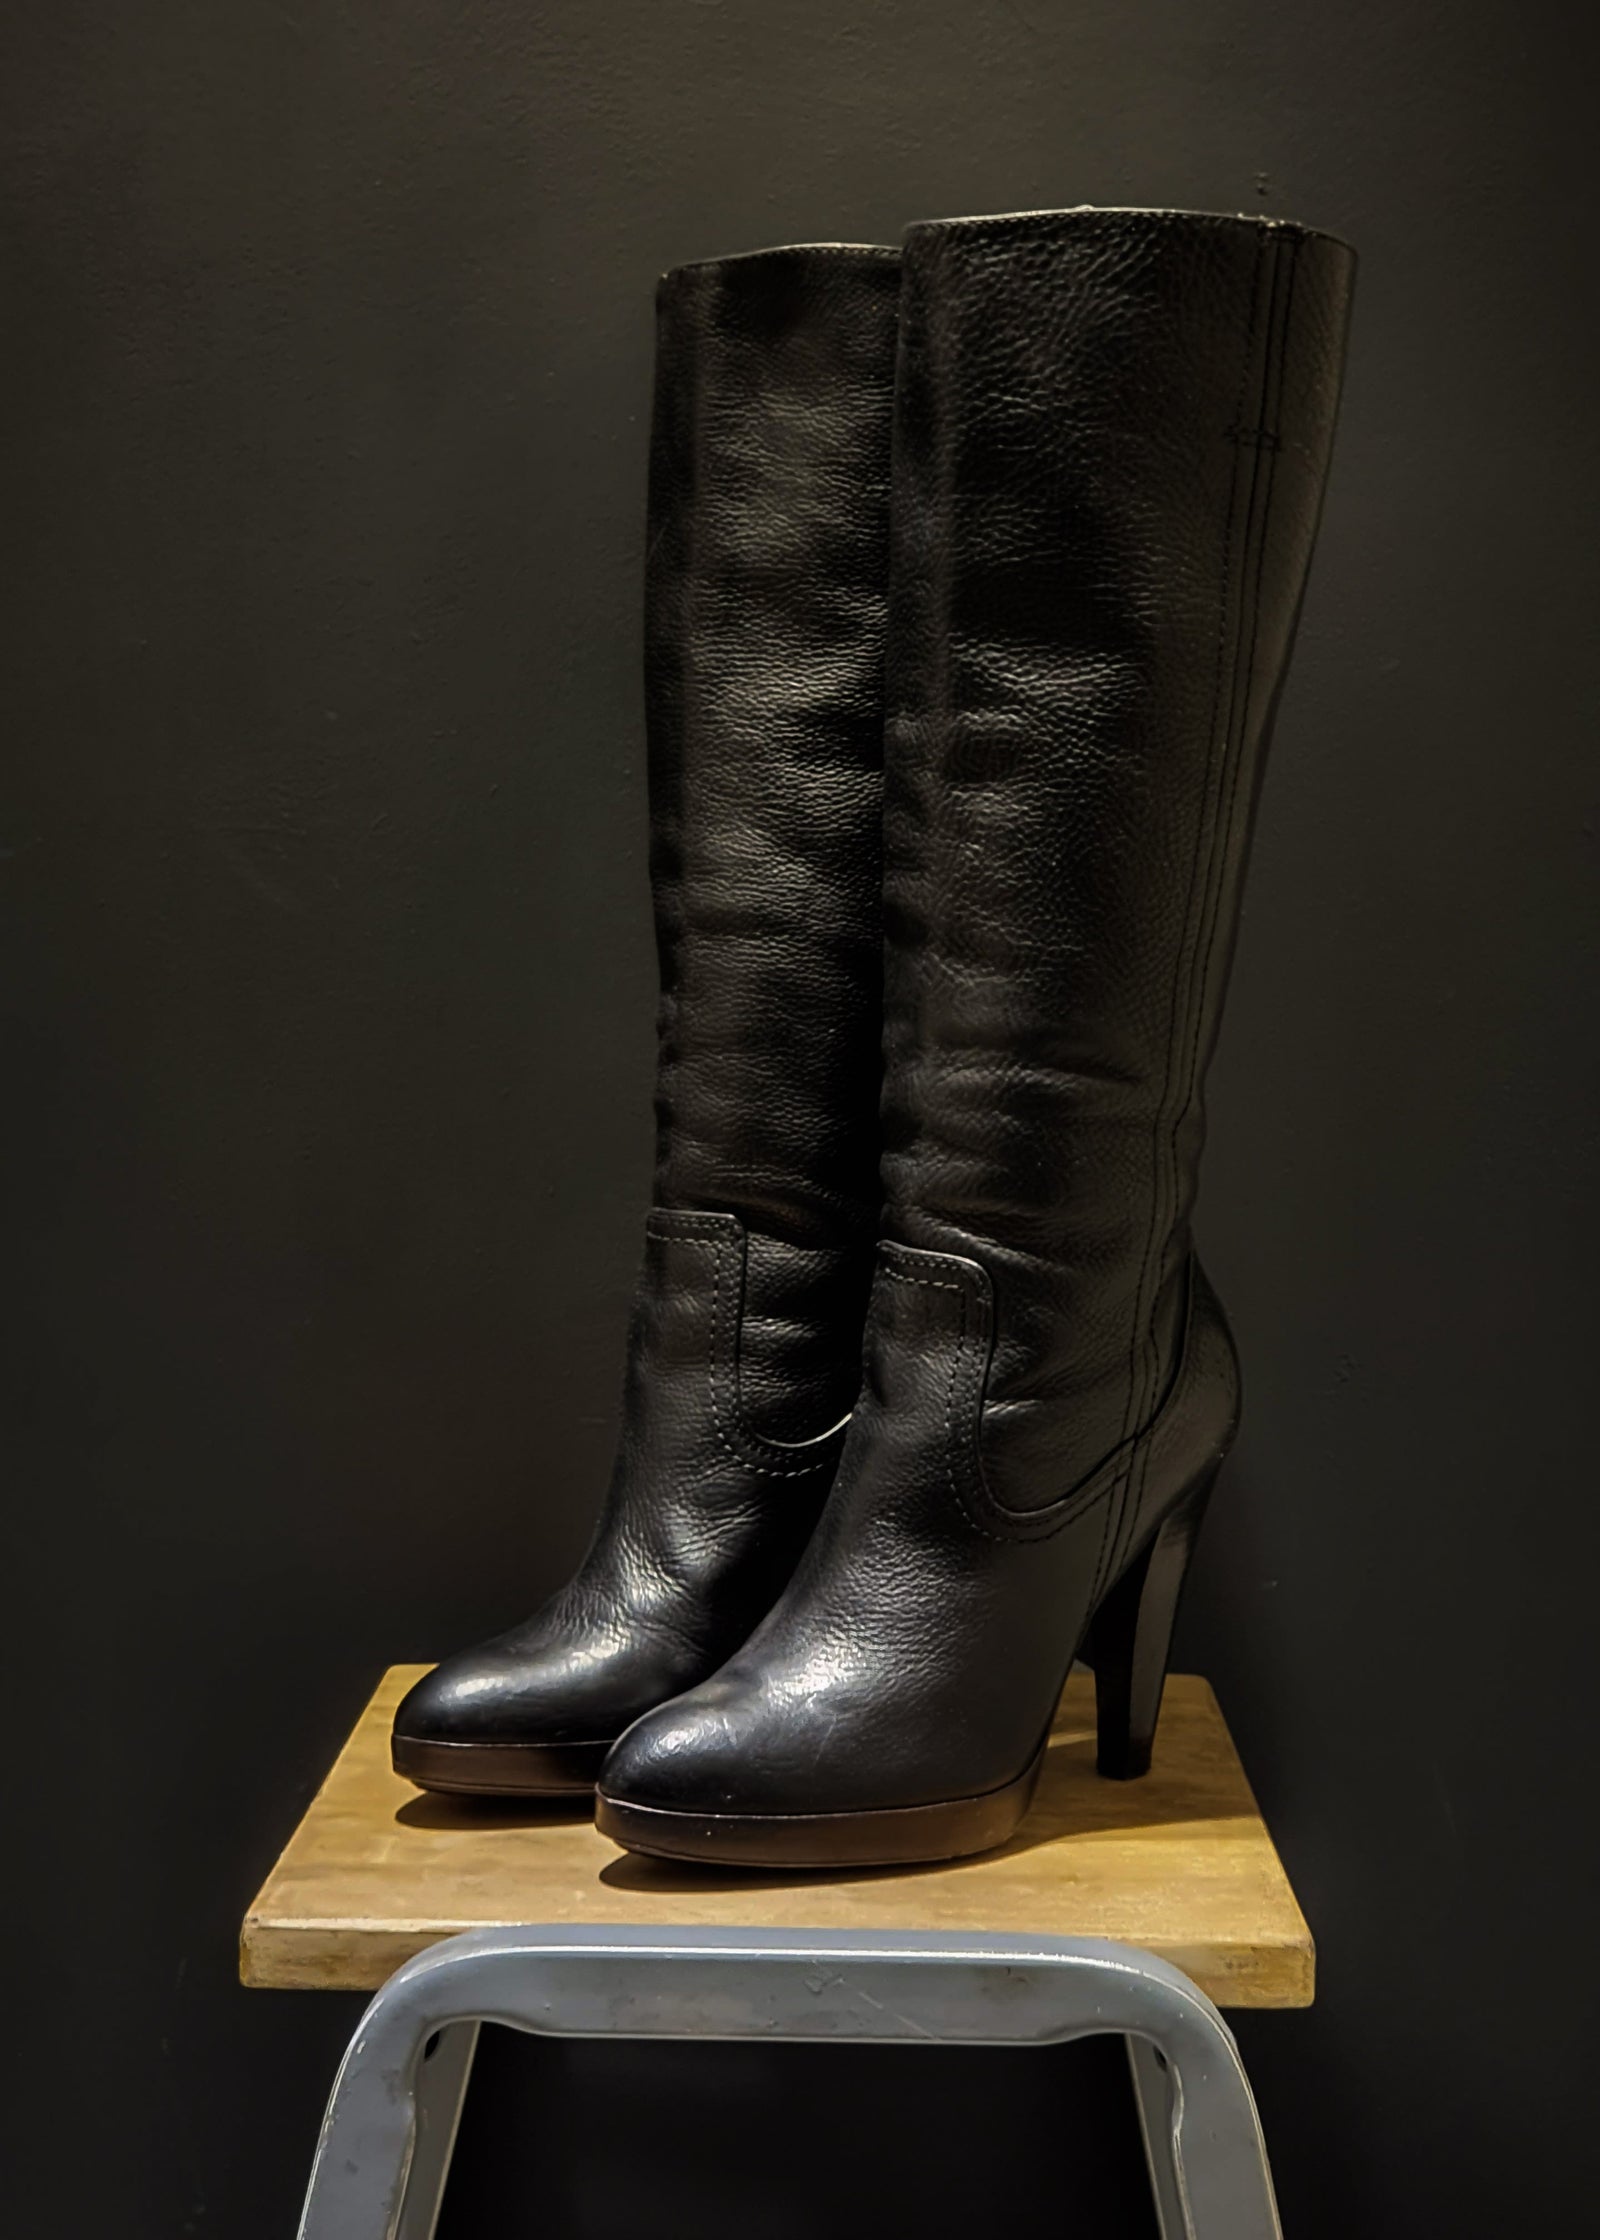 Preworn | Preloved <br> 'FRYE' <br>Harlow Campus Tall Boots <br>Size 7 UK